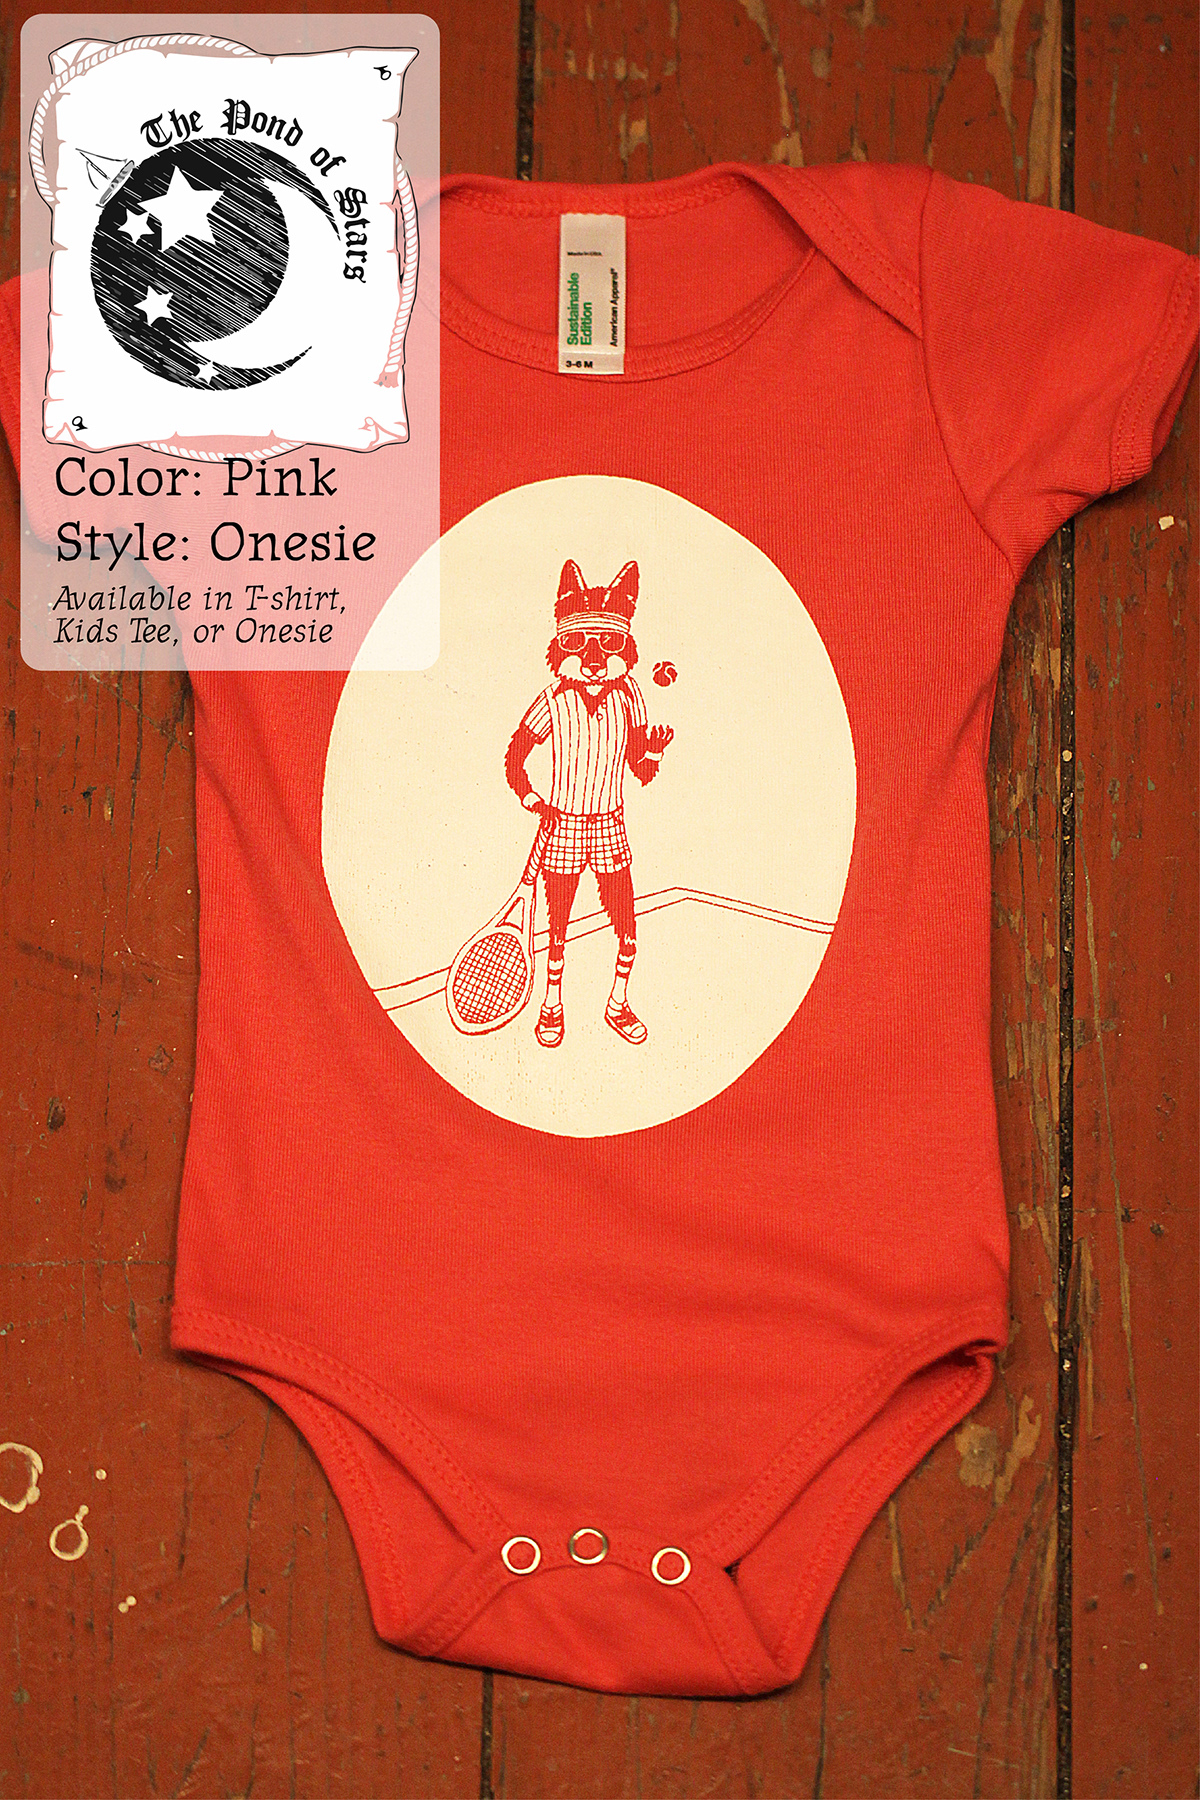 gender-neutral affordable original designs to babies kids animals doing funny Textiles onesies t-shirt Screenprinting silkscreen Anthropomorphic Human-like Animals baby clothing whimsical thepondofstars.com